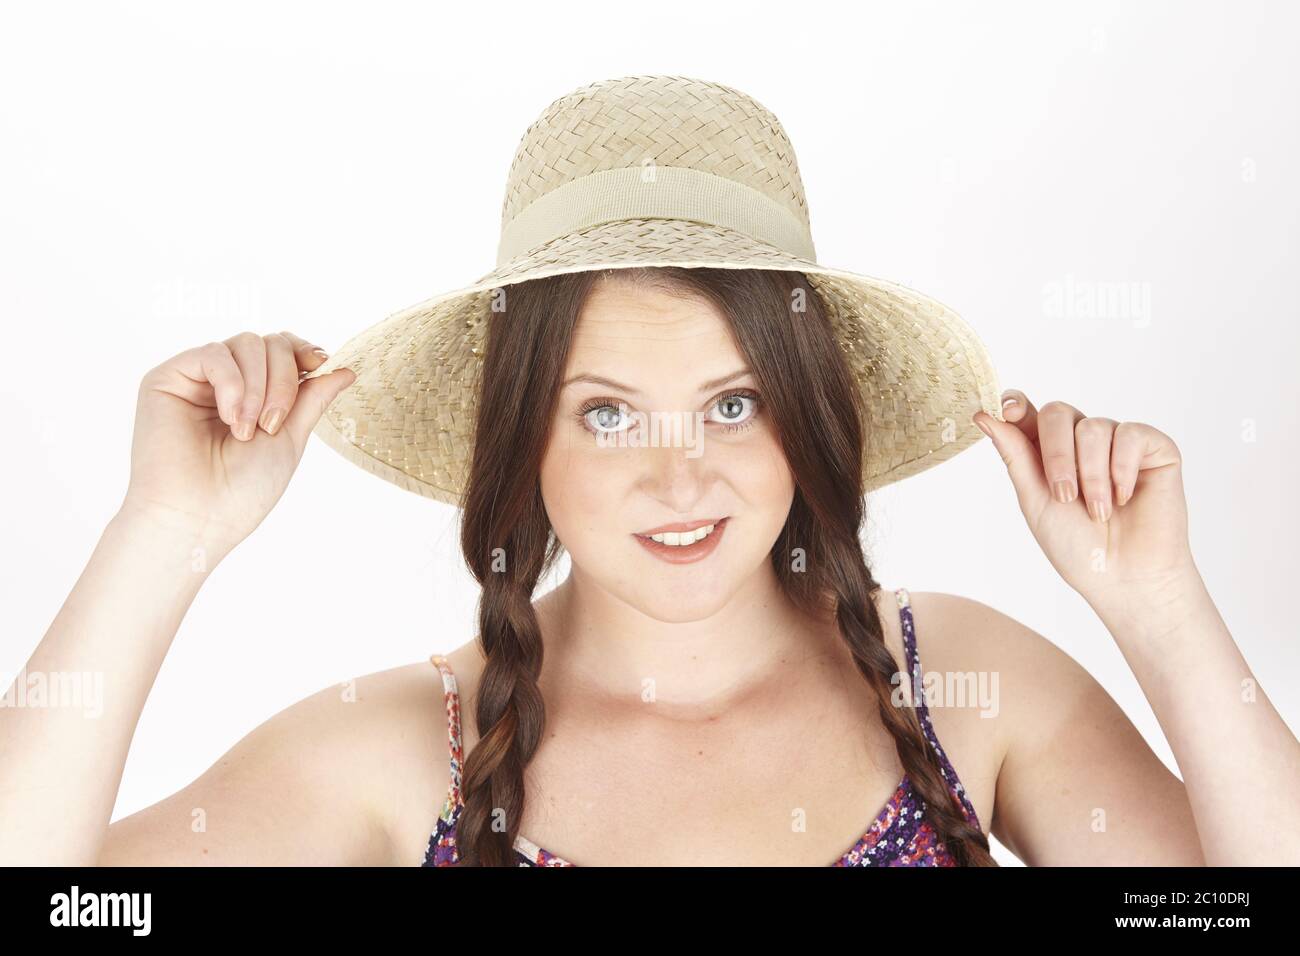 Brunette young woman with plaits enjoys the summer Stock Photo